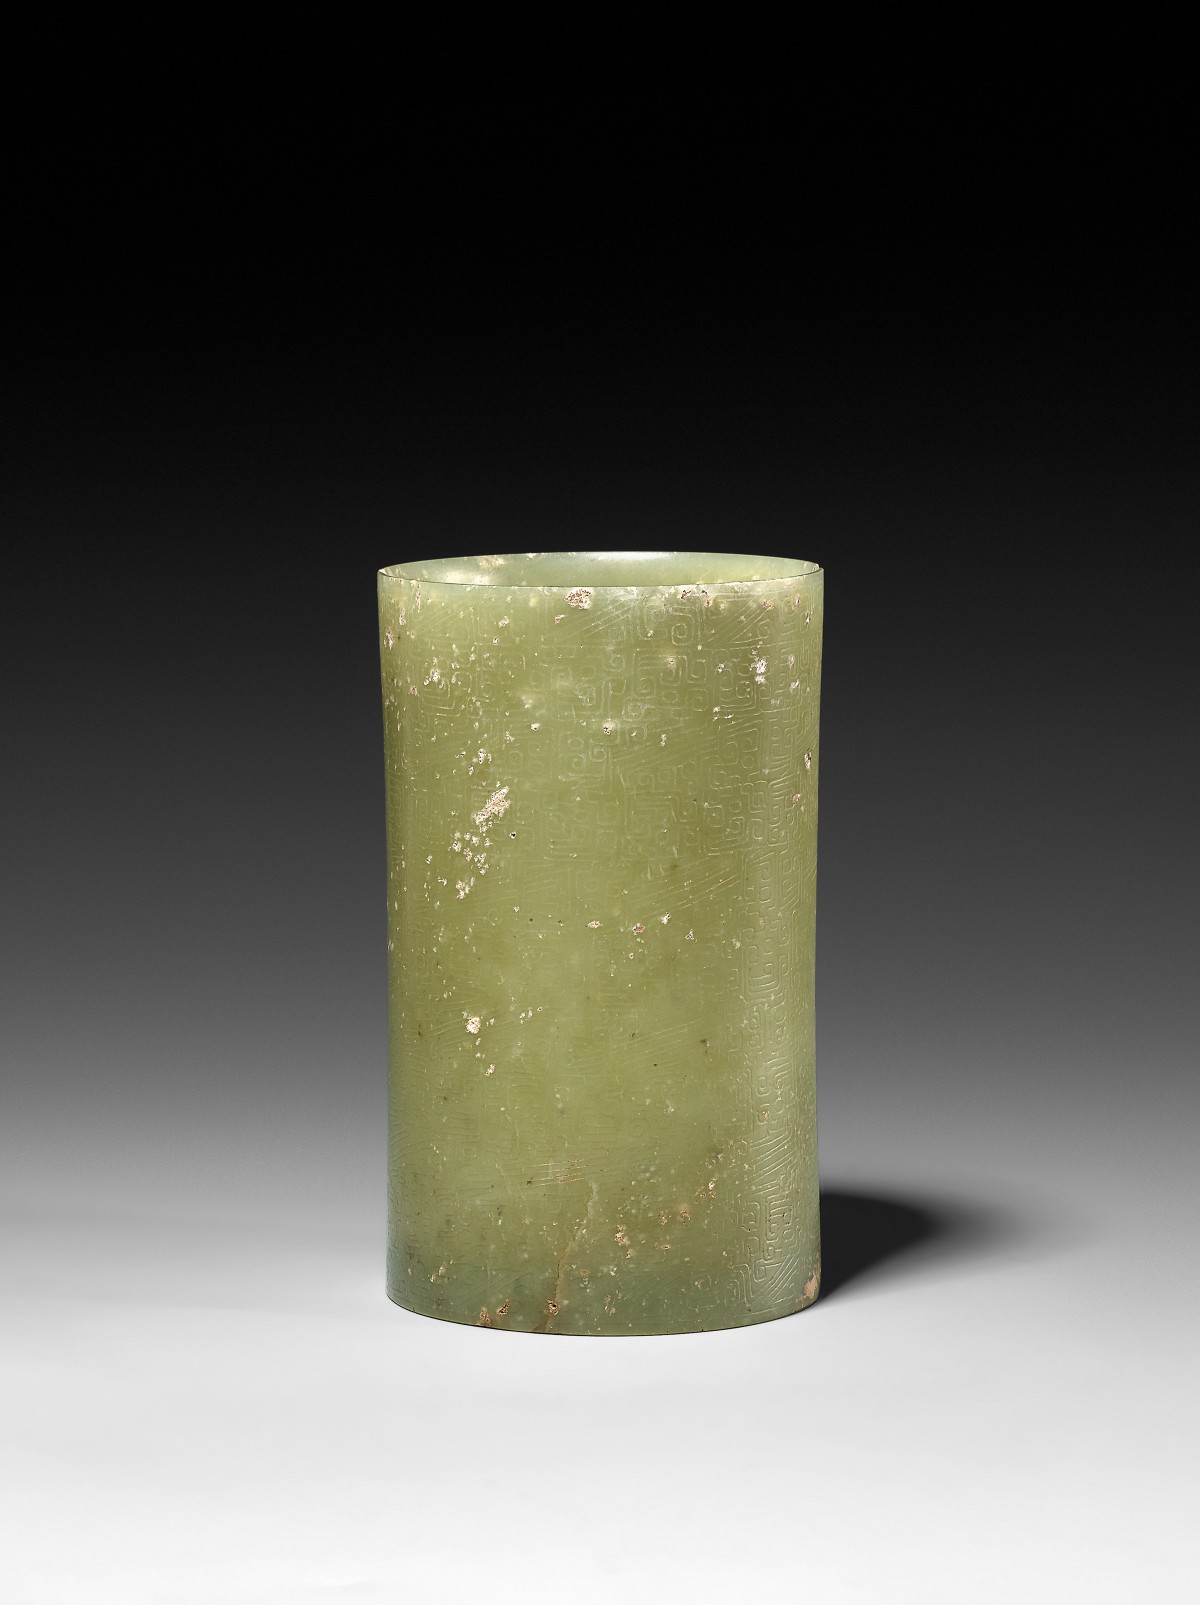 AN ARCHAIC JADE CUP WITH INCISED DECORATION / J.J. Lally & Co ...